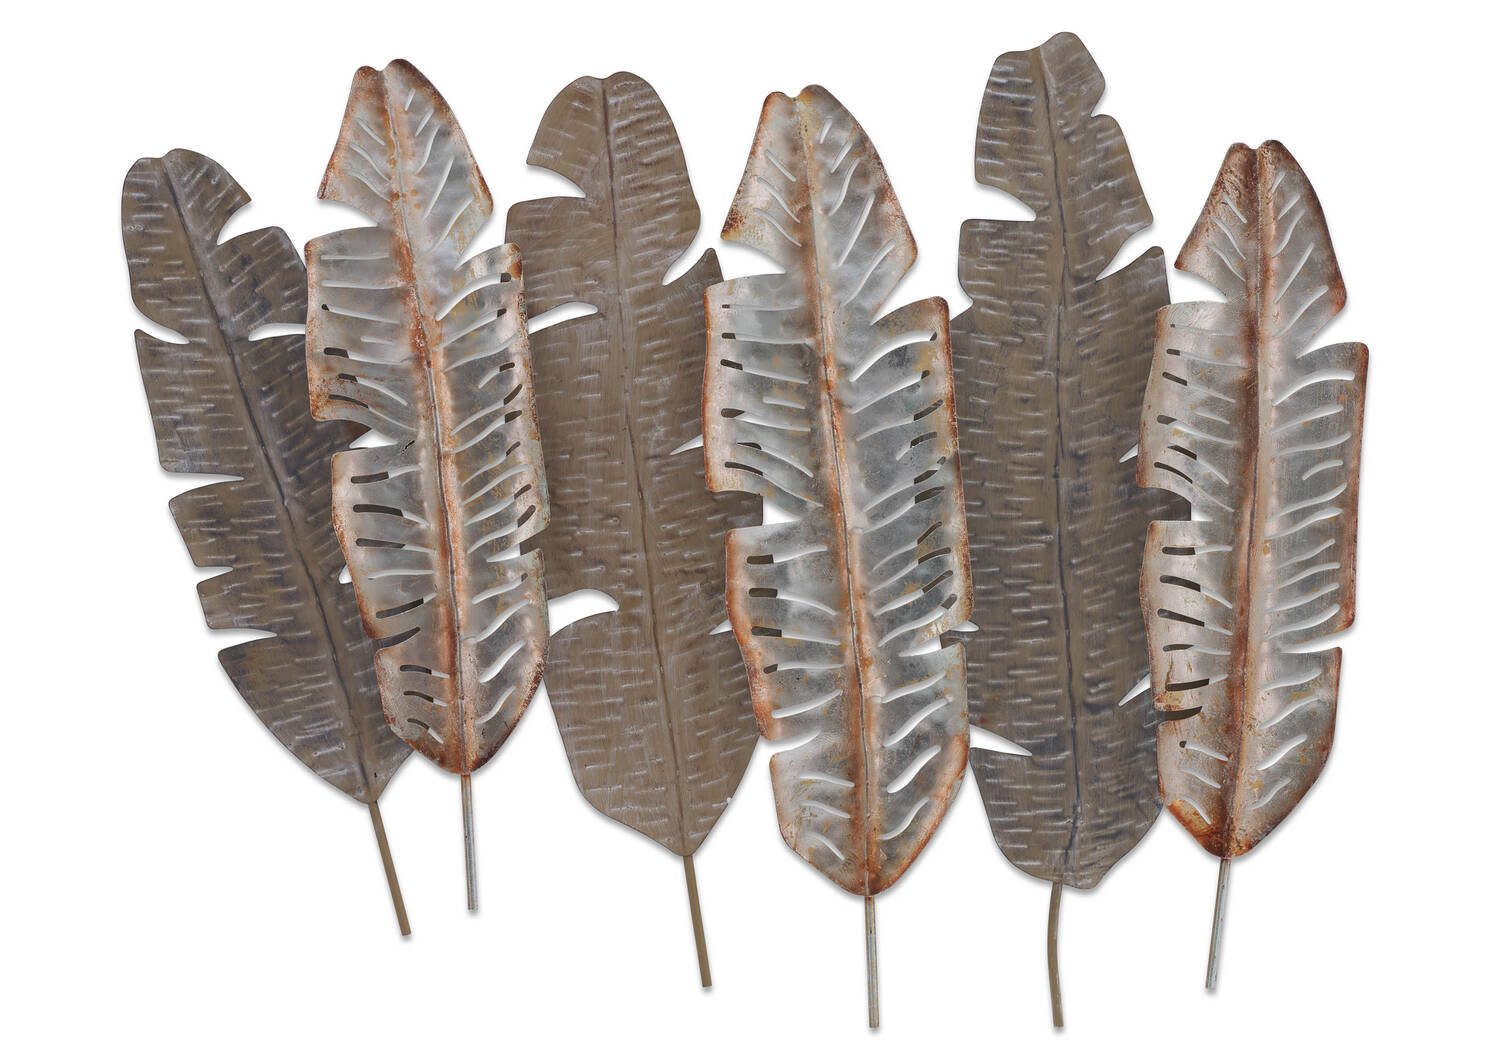 Feather wall decor